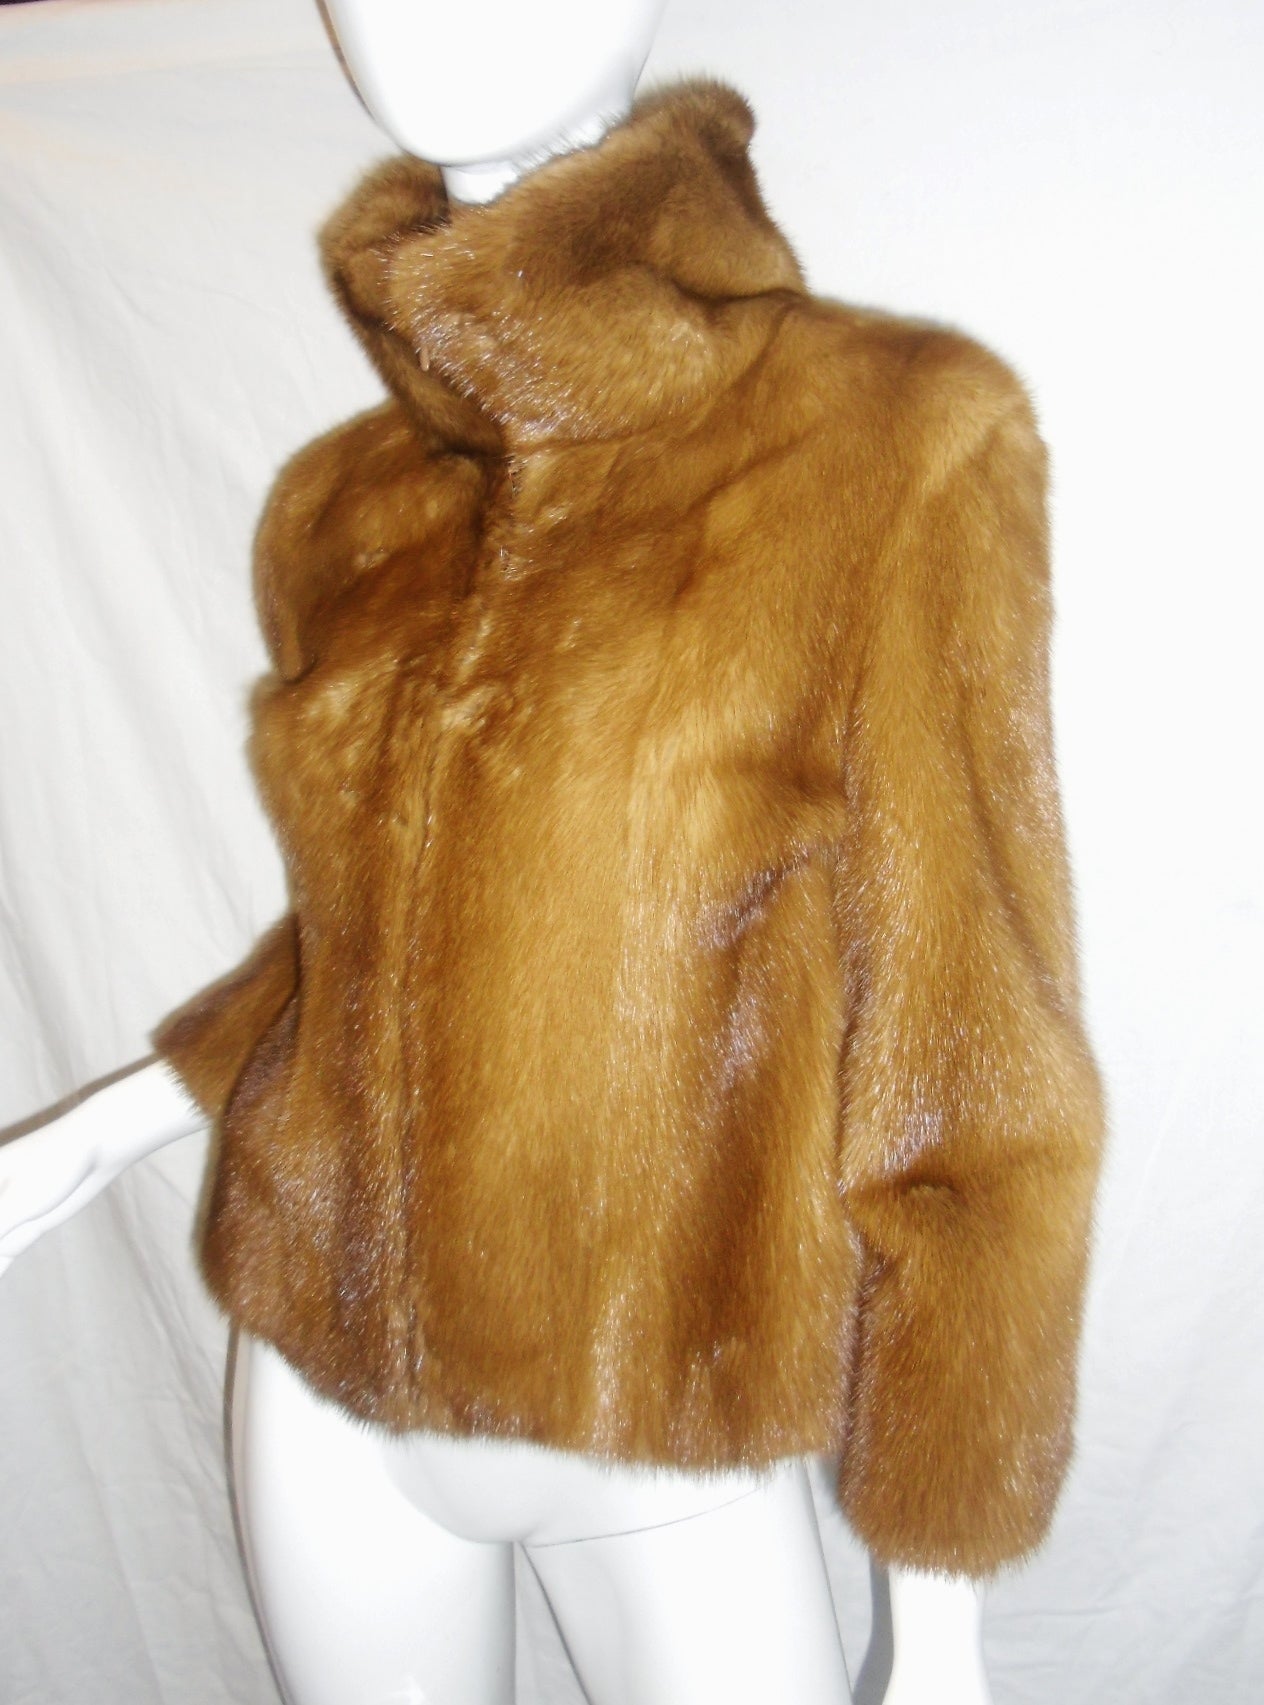 Beautiful and in mint condition Dolce & Gabbana Cognac Mink Fur Jacket Coat Leopard Lining. All female skins. Weight next to nothing. . Features high collar and concealed front zip closure. Size 38 Italian Us 2-4
Bust 34